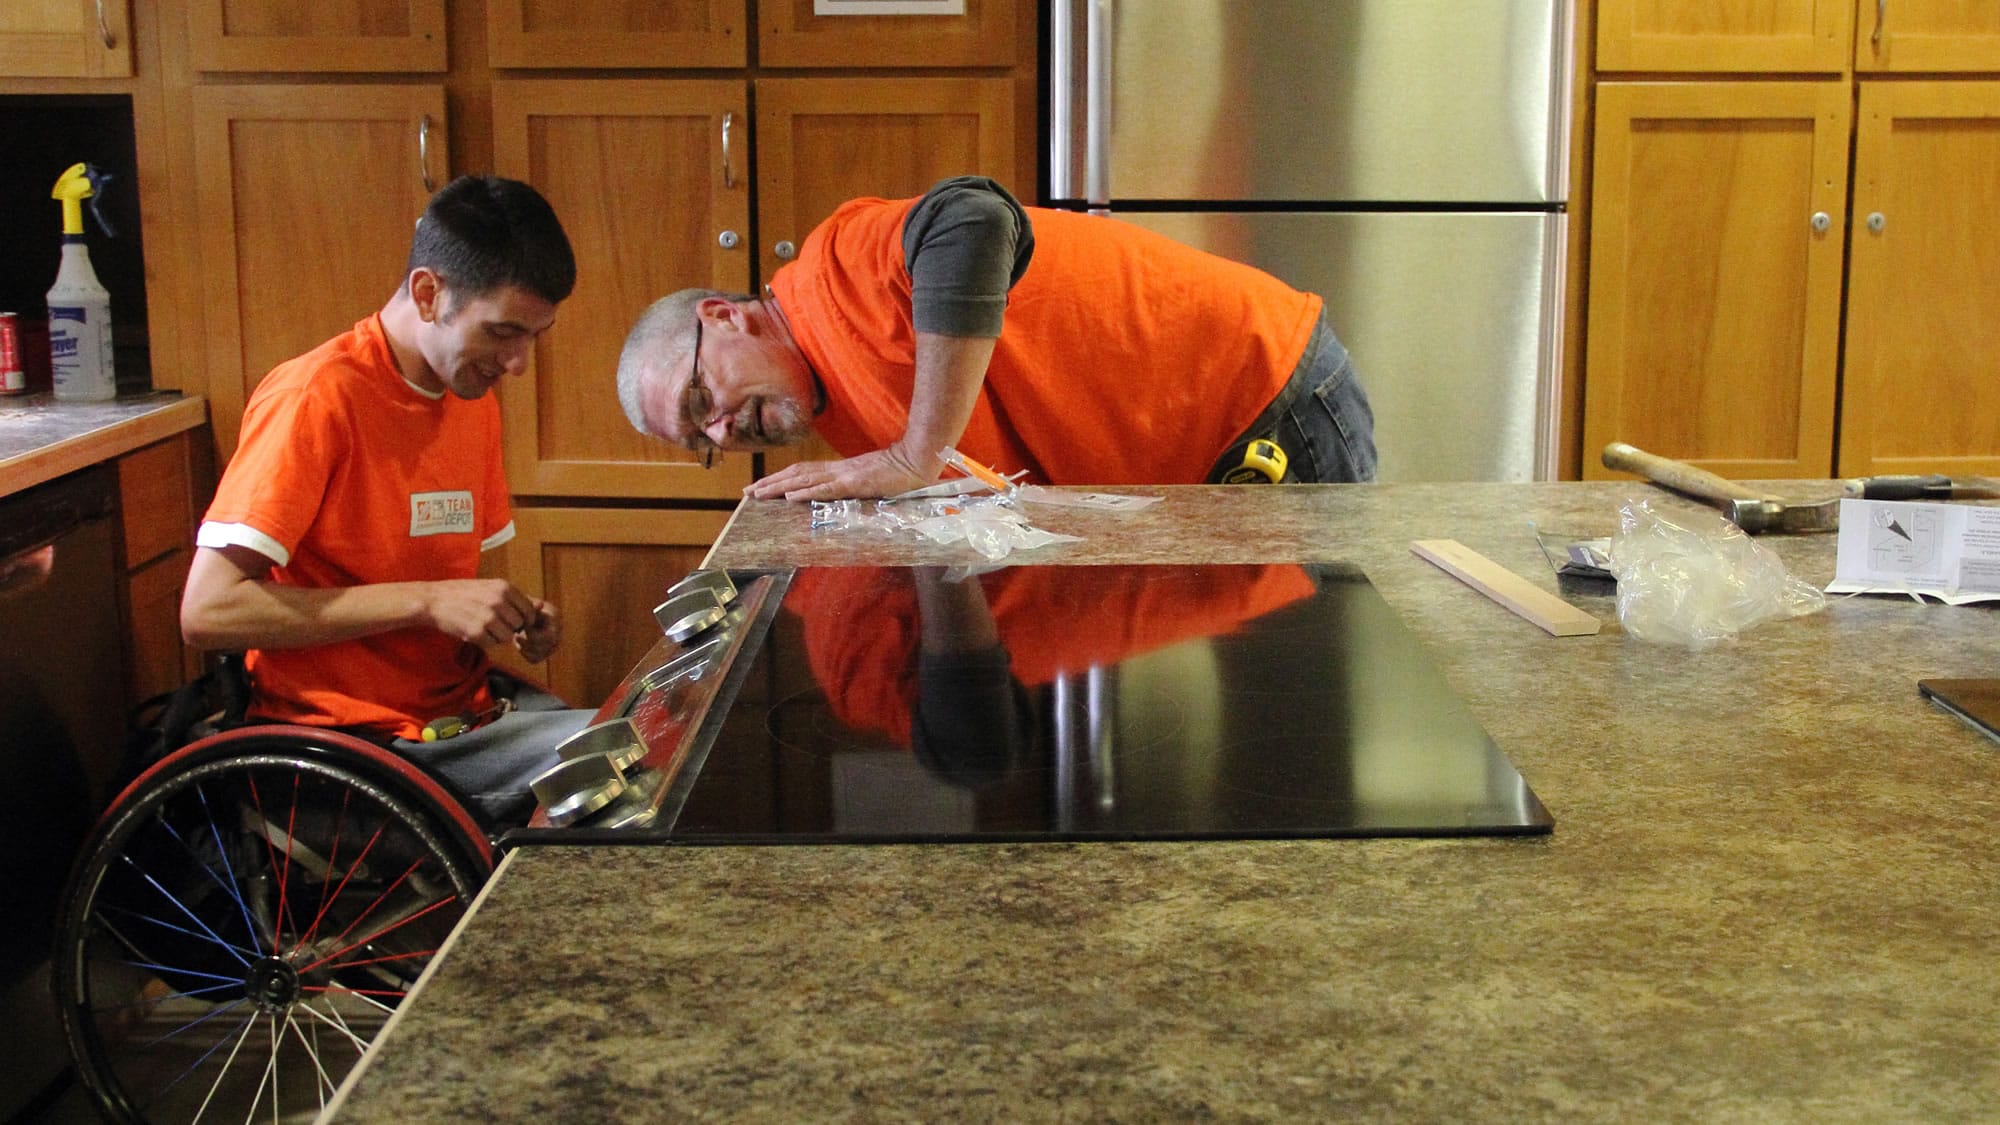 Central Park Place: Employees with &quot;Team Depot&quot; install new countertops at the apartment building for homeless veterans and others.